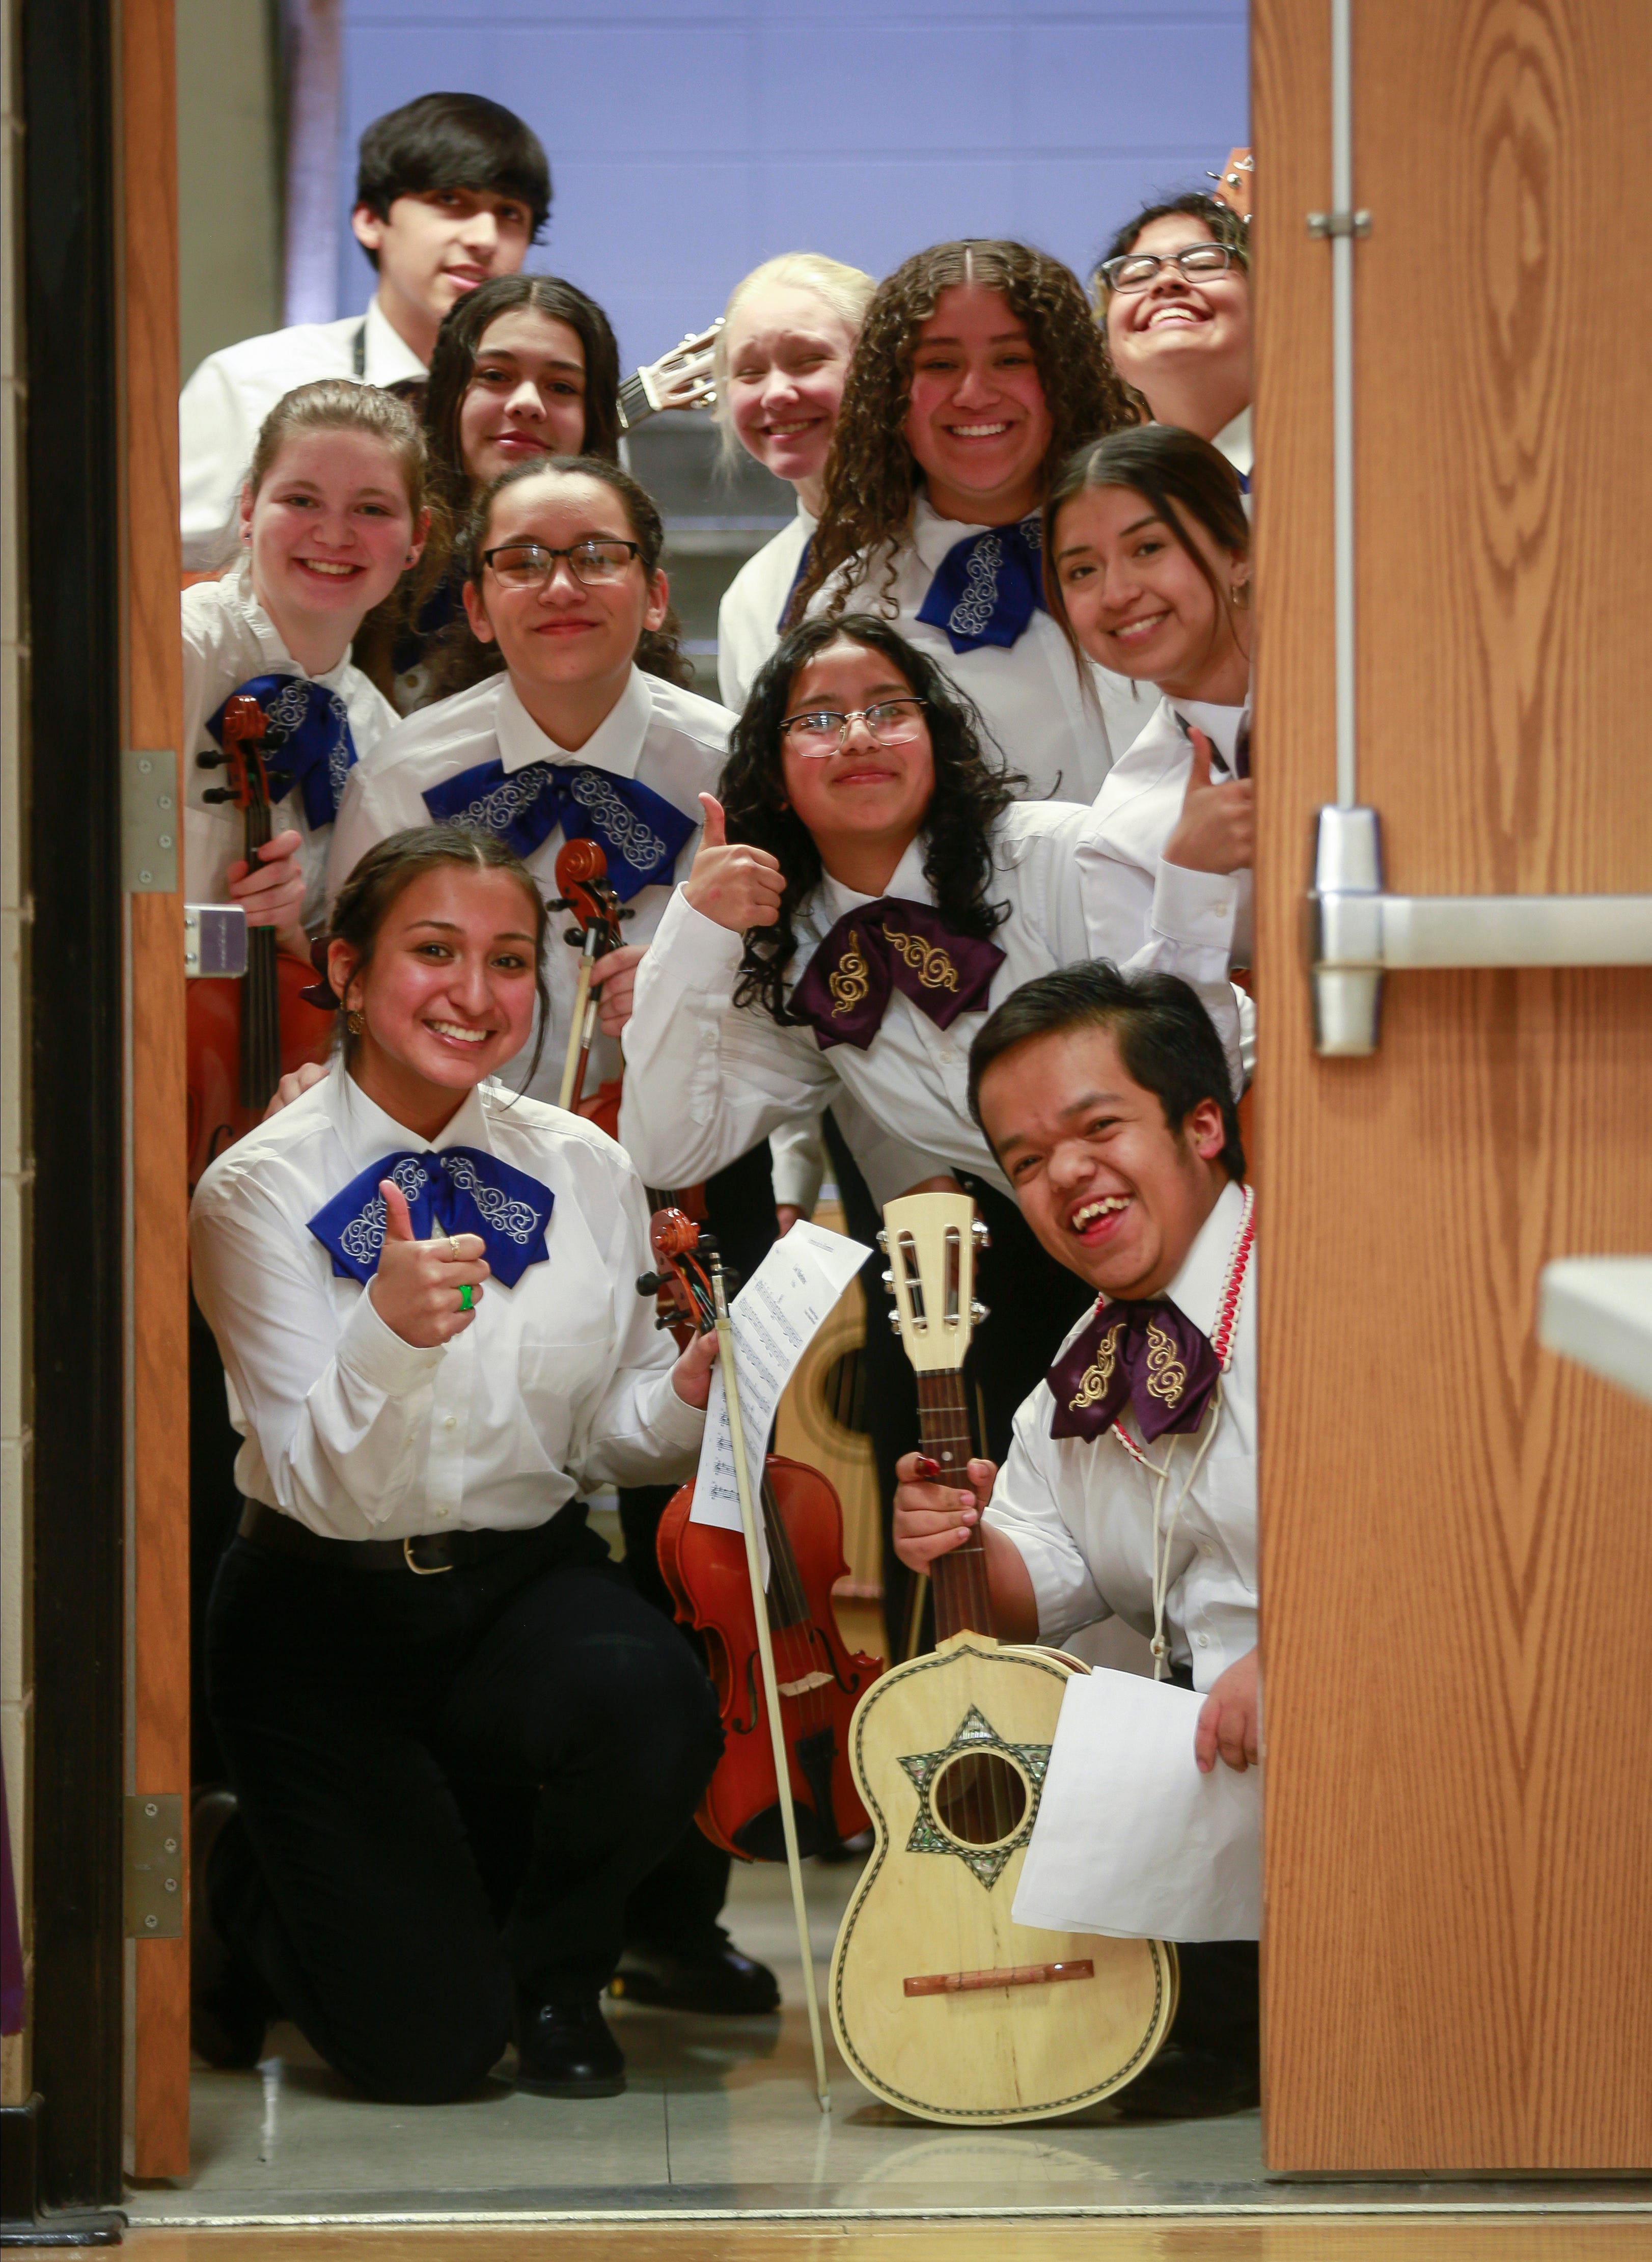 Members of the Denison High School mariachi ensemble pose for a group photo in a doorway to the high school gymnasium prior to the start of the 2022 Fiesta Mariachi celebration.